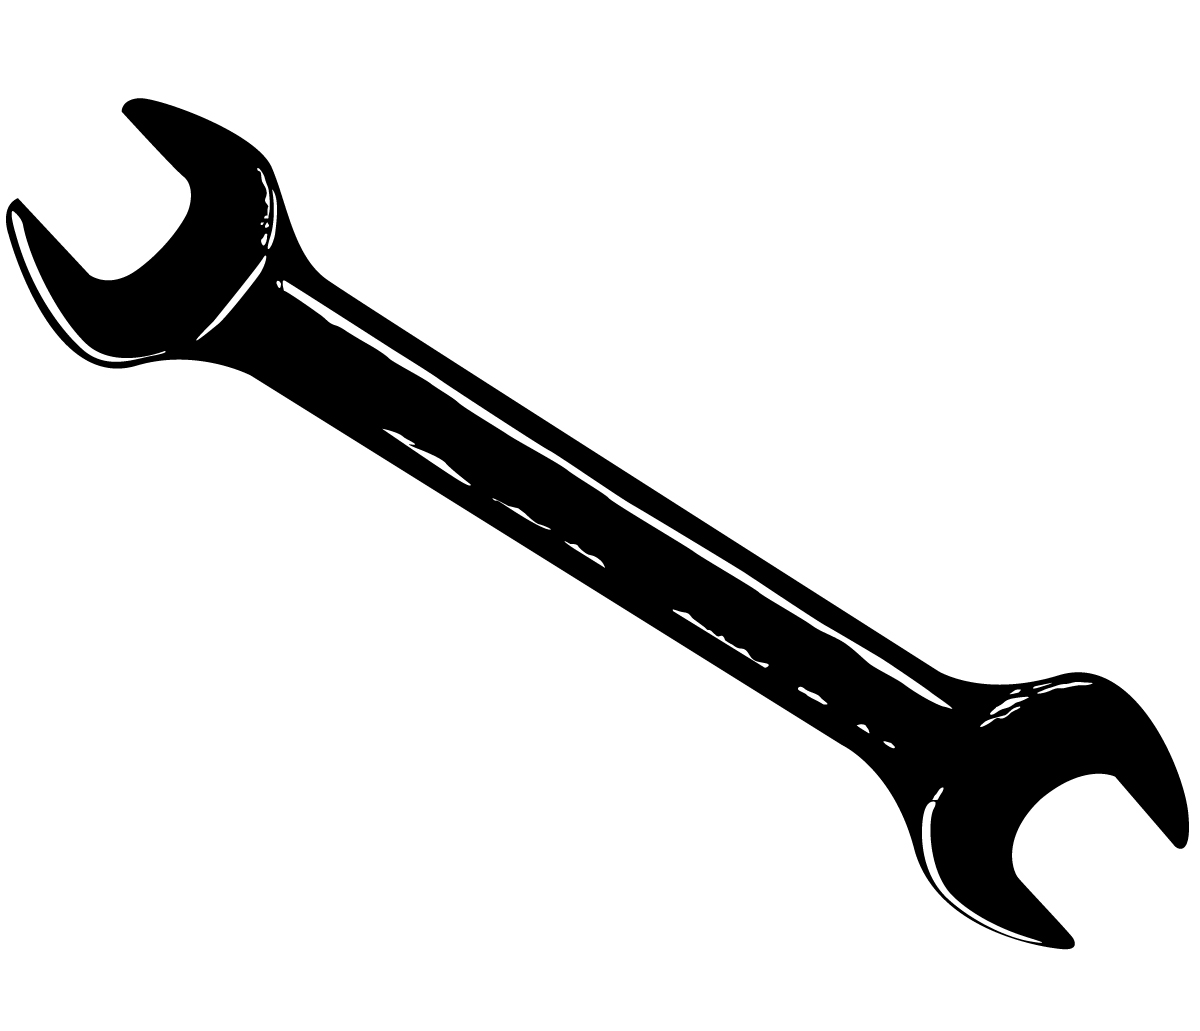 Free Wrench Silhouette Cliparts, Download Free Clip Art